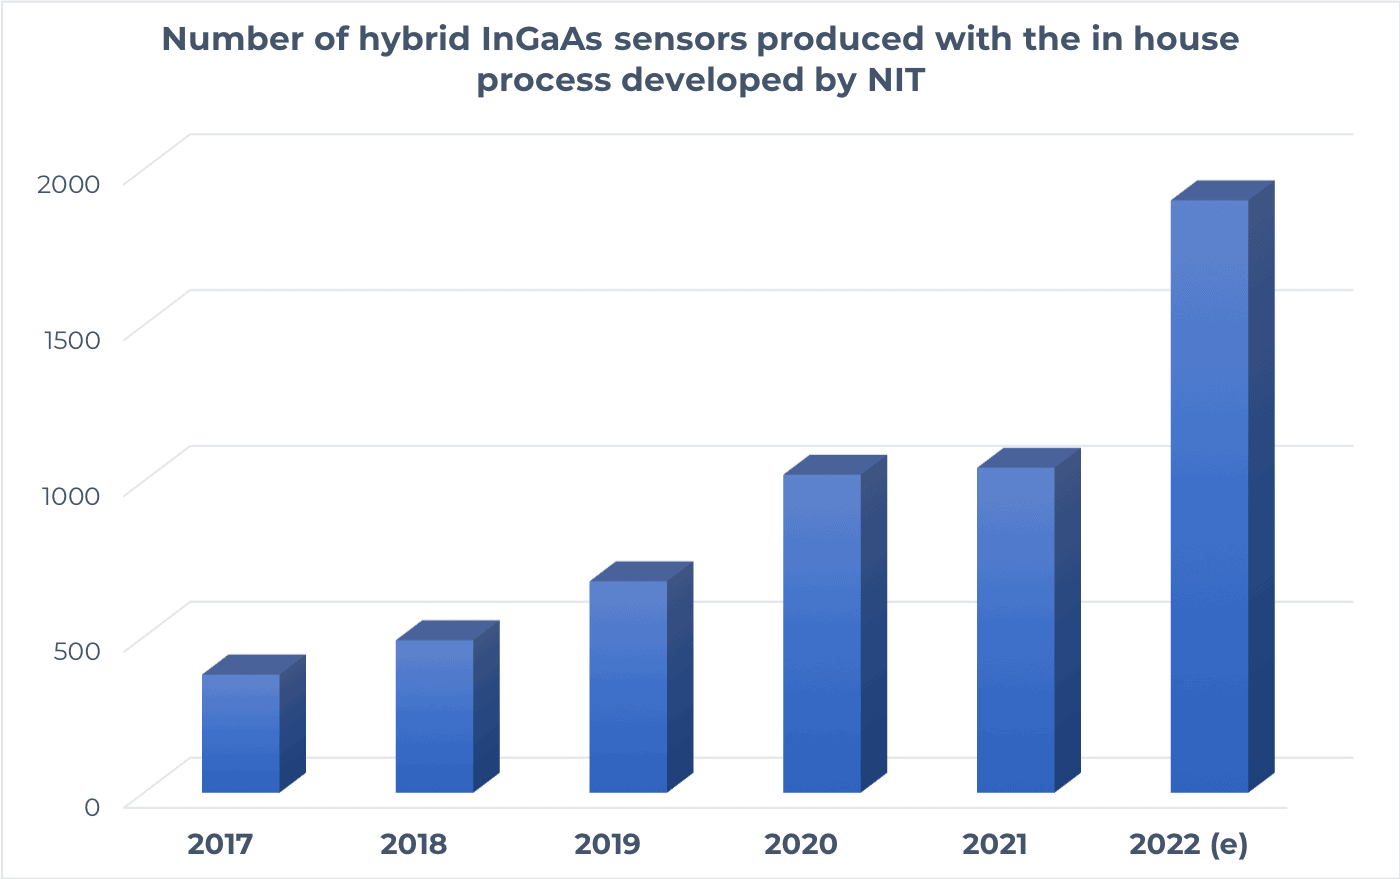 Number of hybrid InGaAs sensors produced with the in house process developed by NIT